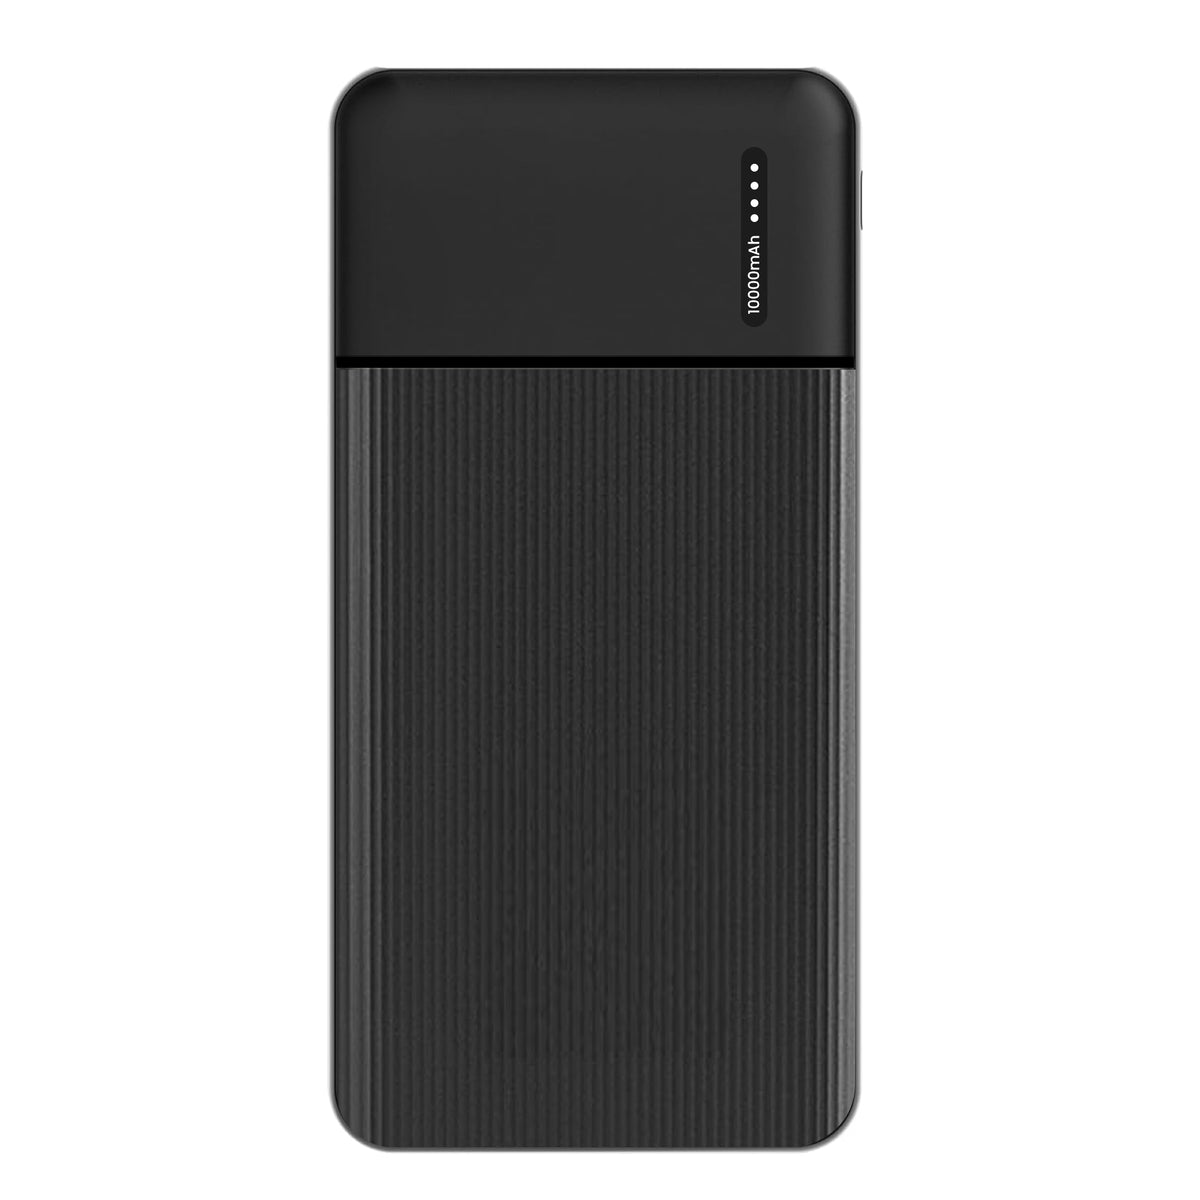 10,000 mAh Ultra Slim Power Bank with Type C Dual Ports | 12W Fast Charging | Free Type C Cable